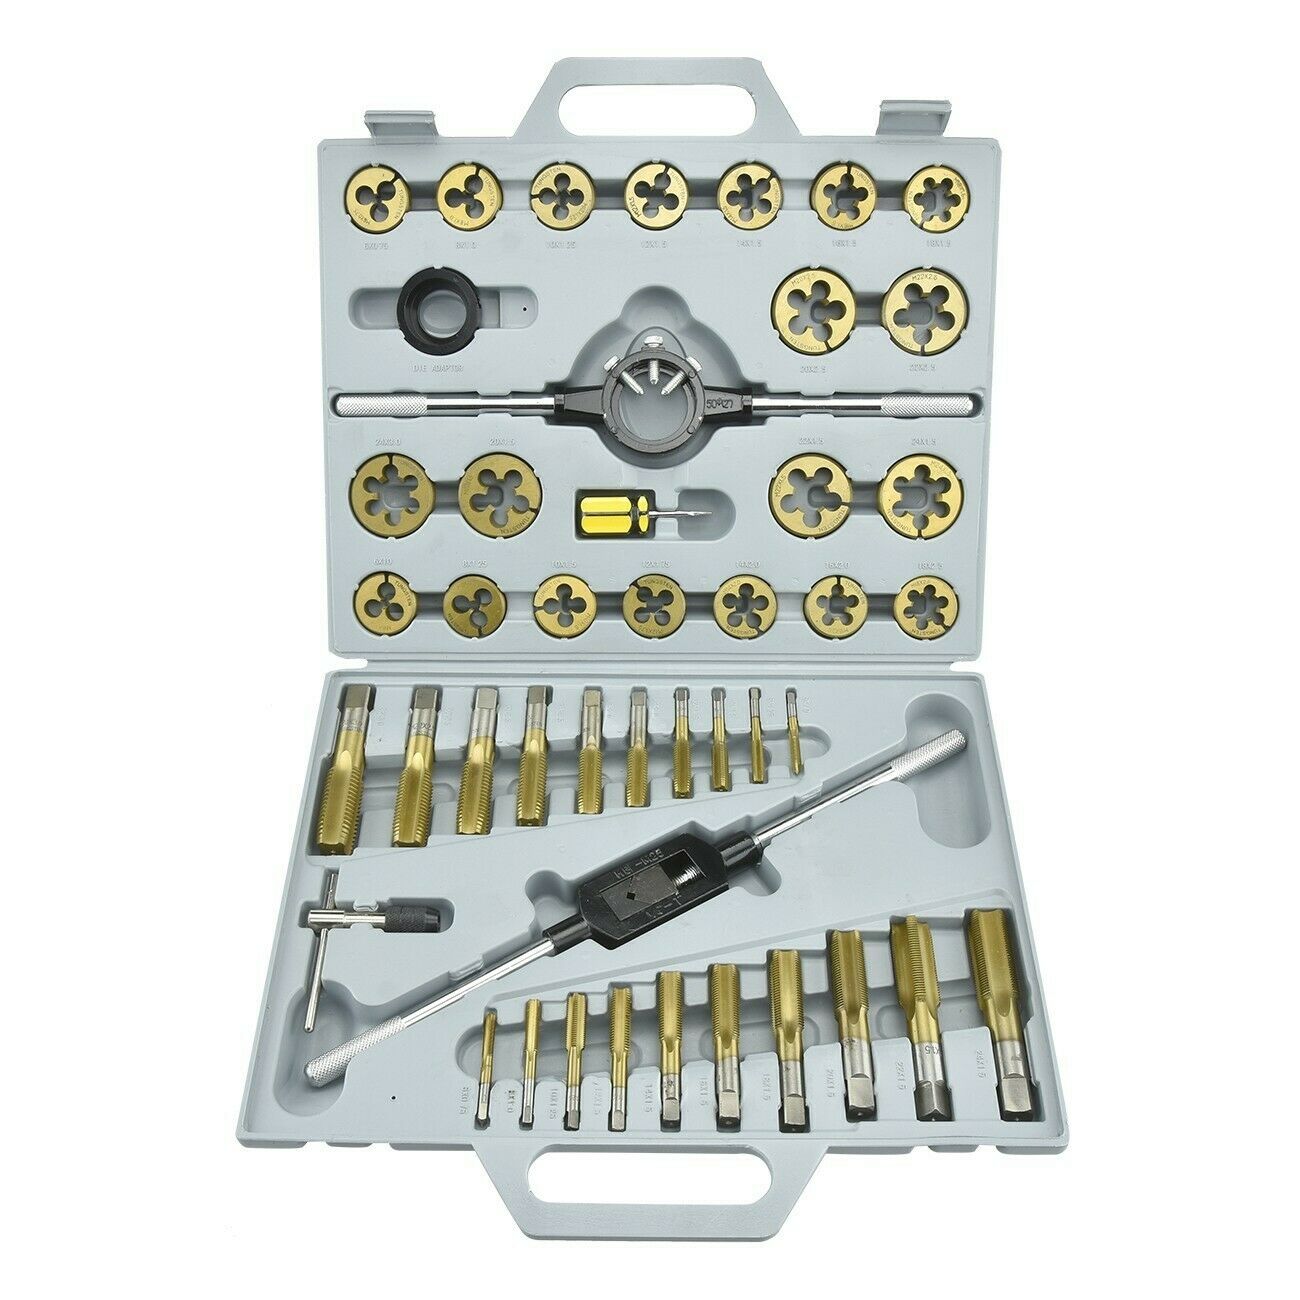 45pc SAE TUNGSTEN Steel TAP and DIE SET with CASE Big Jumbo Heavy Duty New inch 